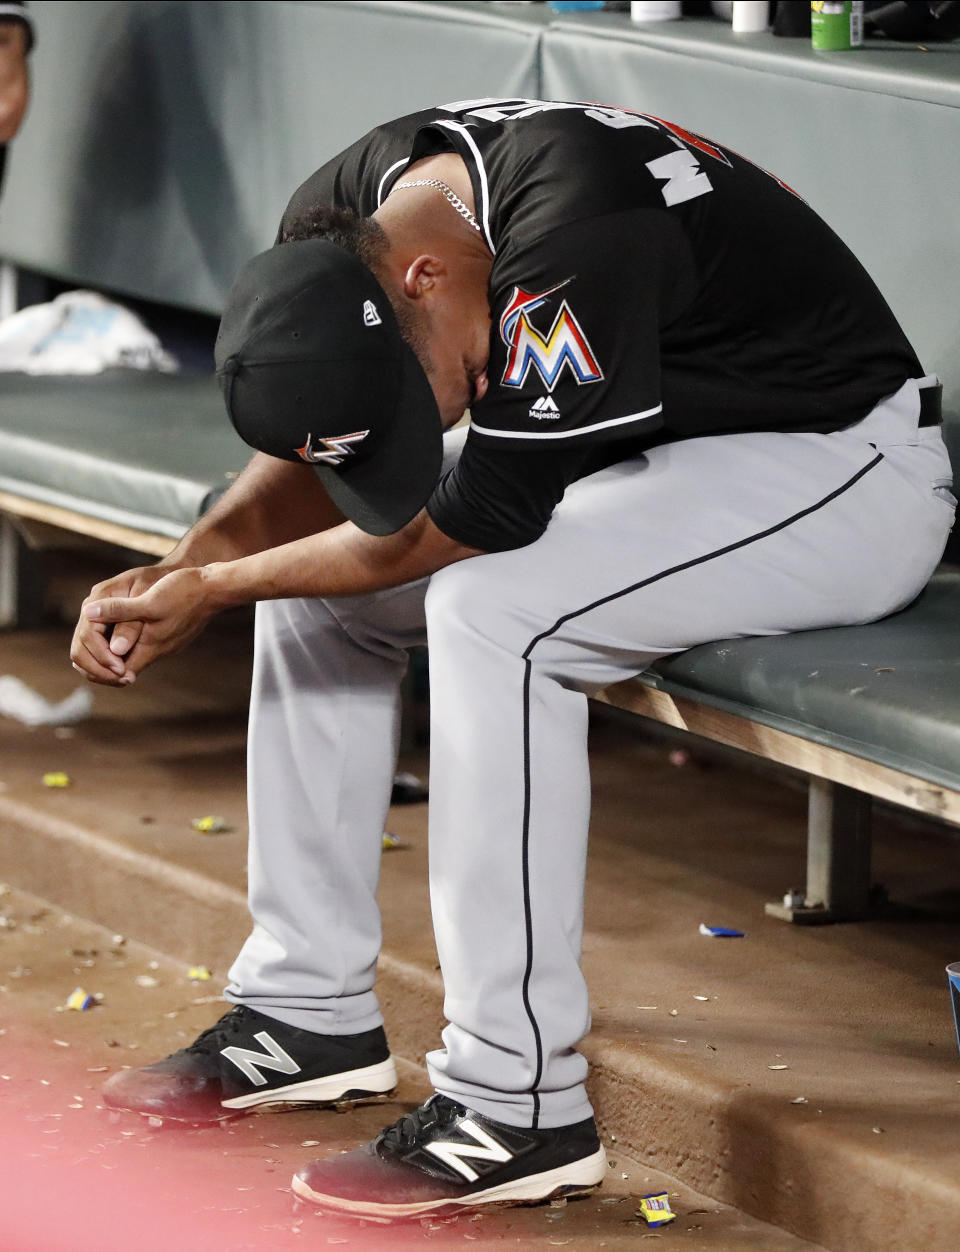 Miami Marlins starting pitcher Merandy Gonzalez (77) sits on the bench after being relieved in the fifth inning of the second baseball game of a doubleheader against the Atlanta Braves Monday, Aug. 13, 2018 in Atlanta. (AP Photo/John Bazemore)